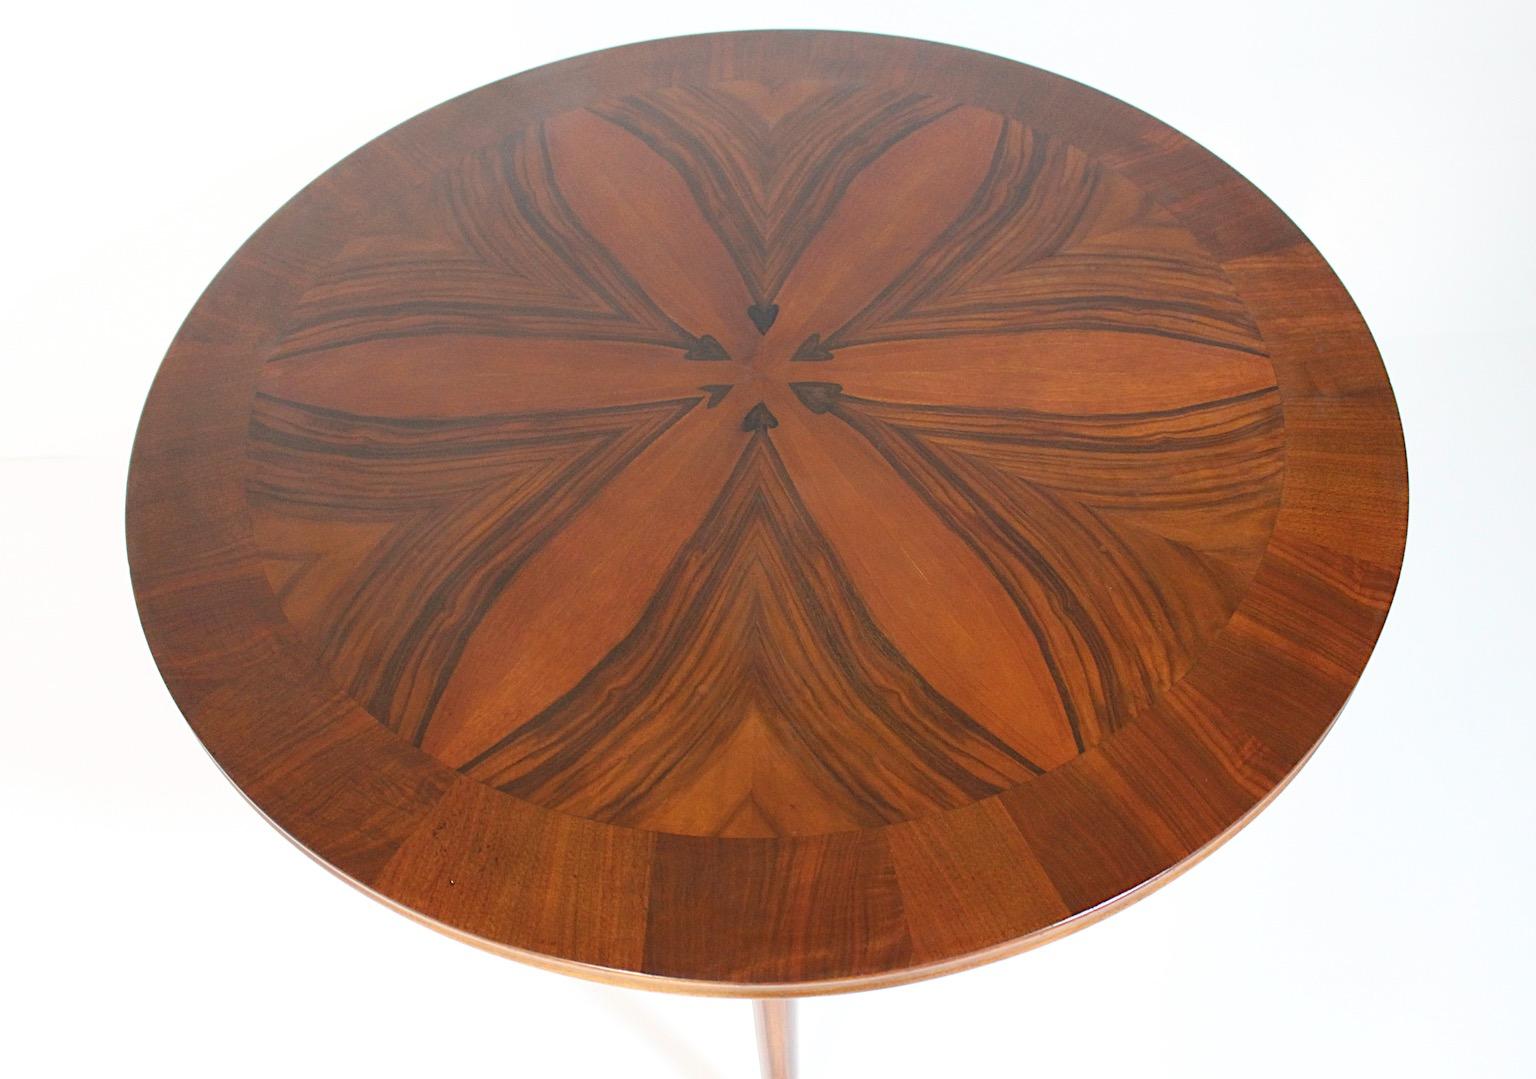 Art Deco vintage circular like coffee table or side table attributed to Josef Frank circa 1925 Vienna.
A beautiful coffee table with an extraordinary veneer pattern hearts like from walnut edged with a decor line.
With fluted legs and a wonderful